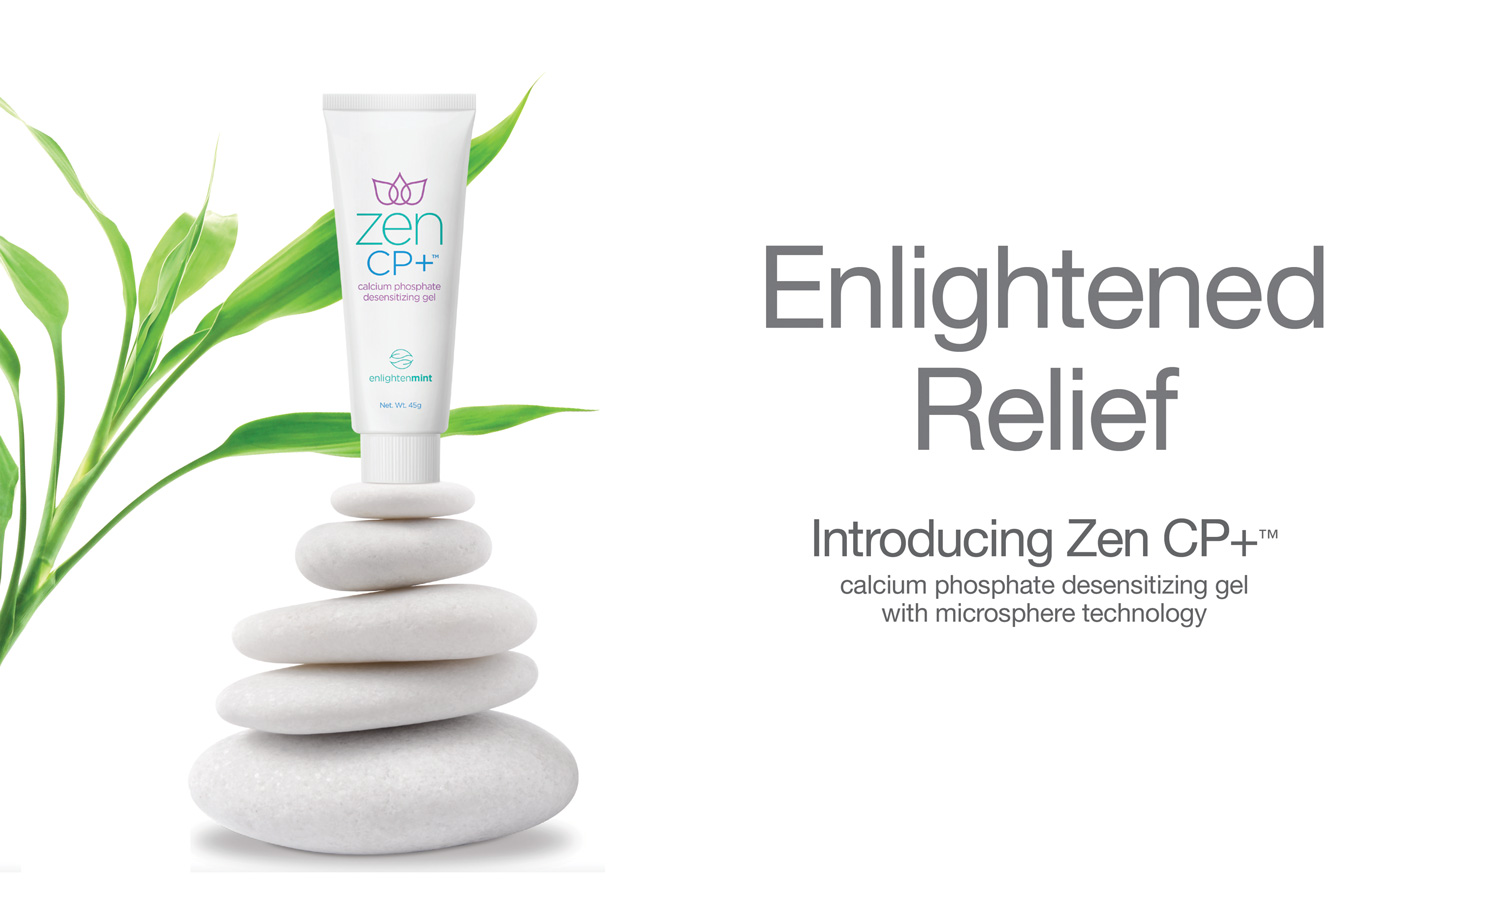 Designed for daily use, ZEN CP+ is available in 45 gram tubes and is simply brushed on to the teeth as part of one’s daily oral care regimen.